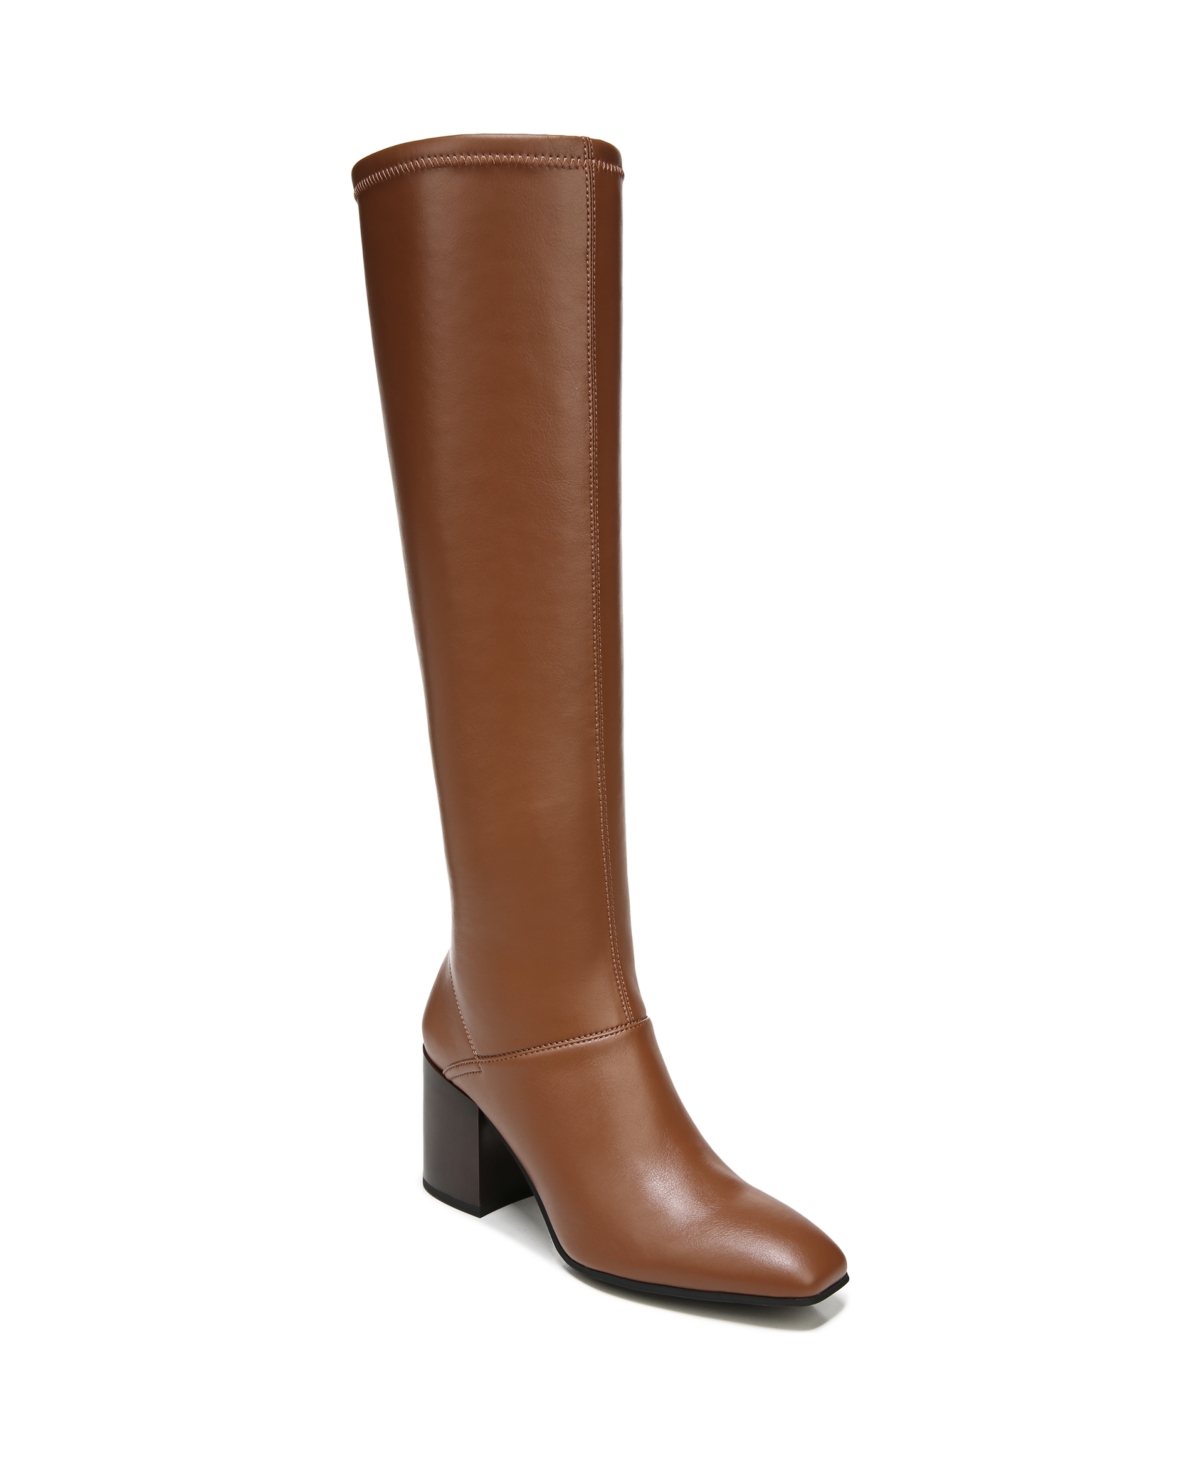 UPC 017138593274 product image for Franco Sarto Tribute High Shaft Boots Women's Shoes | upcitemdb.com